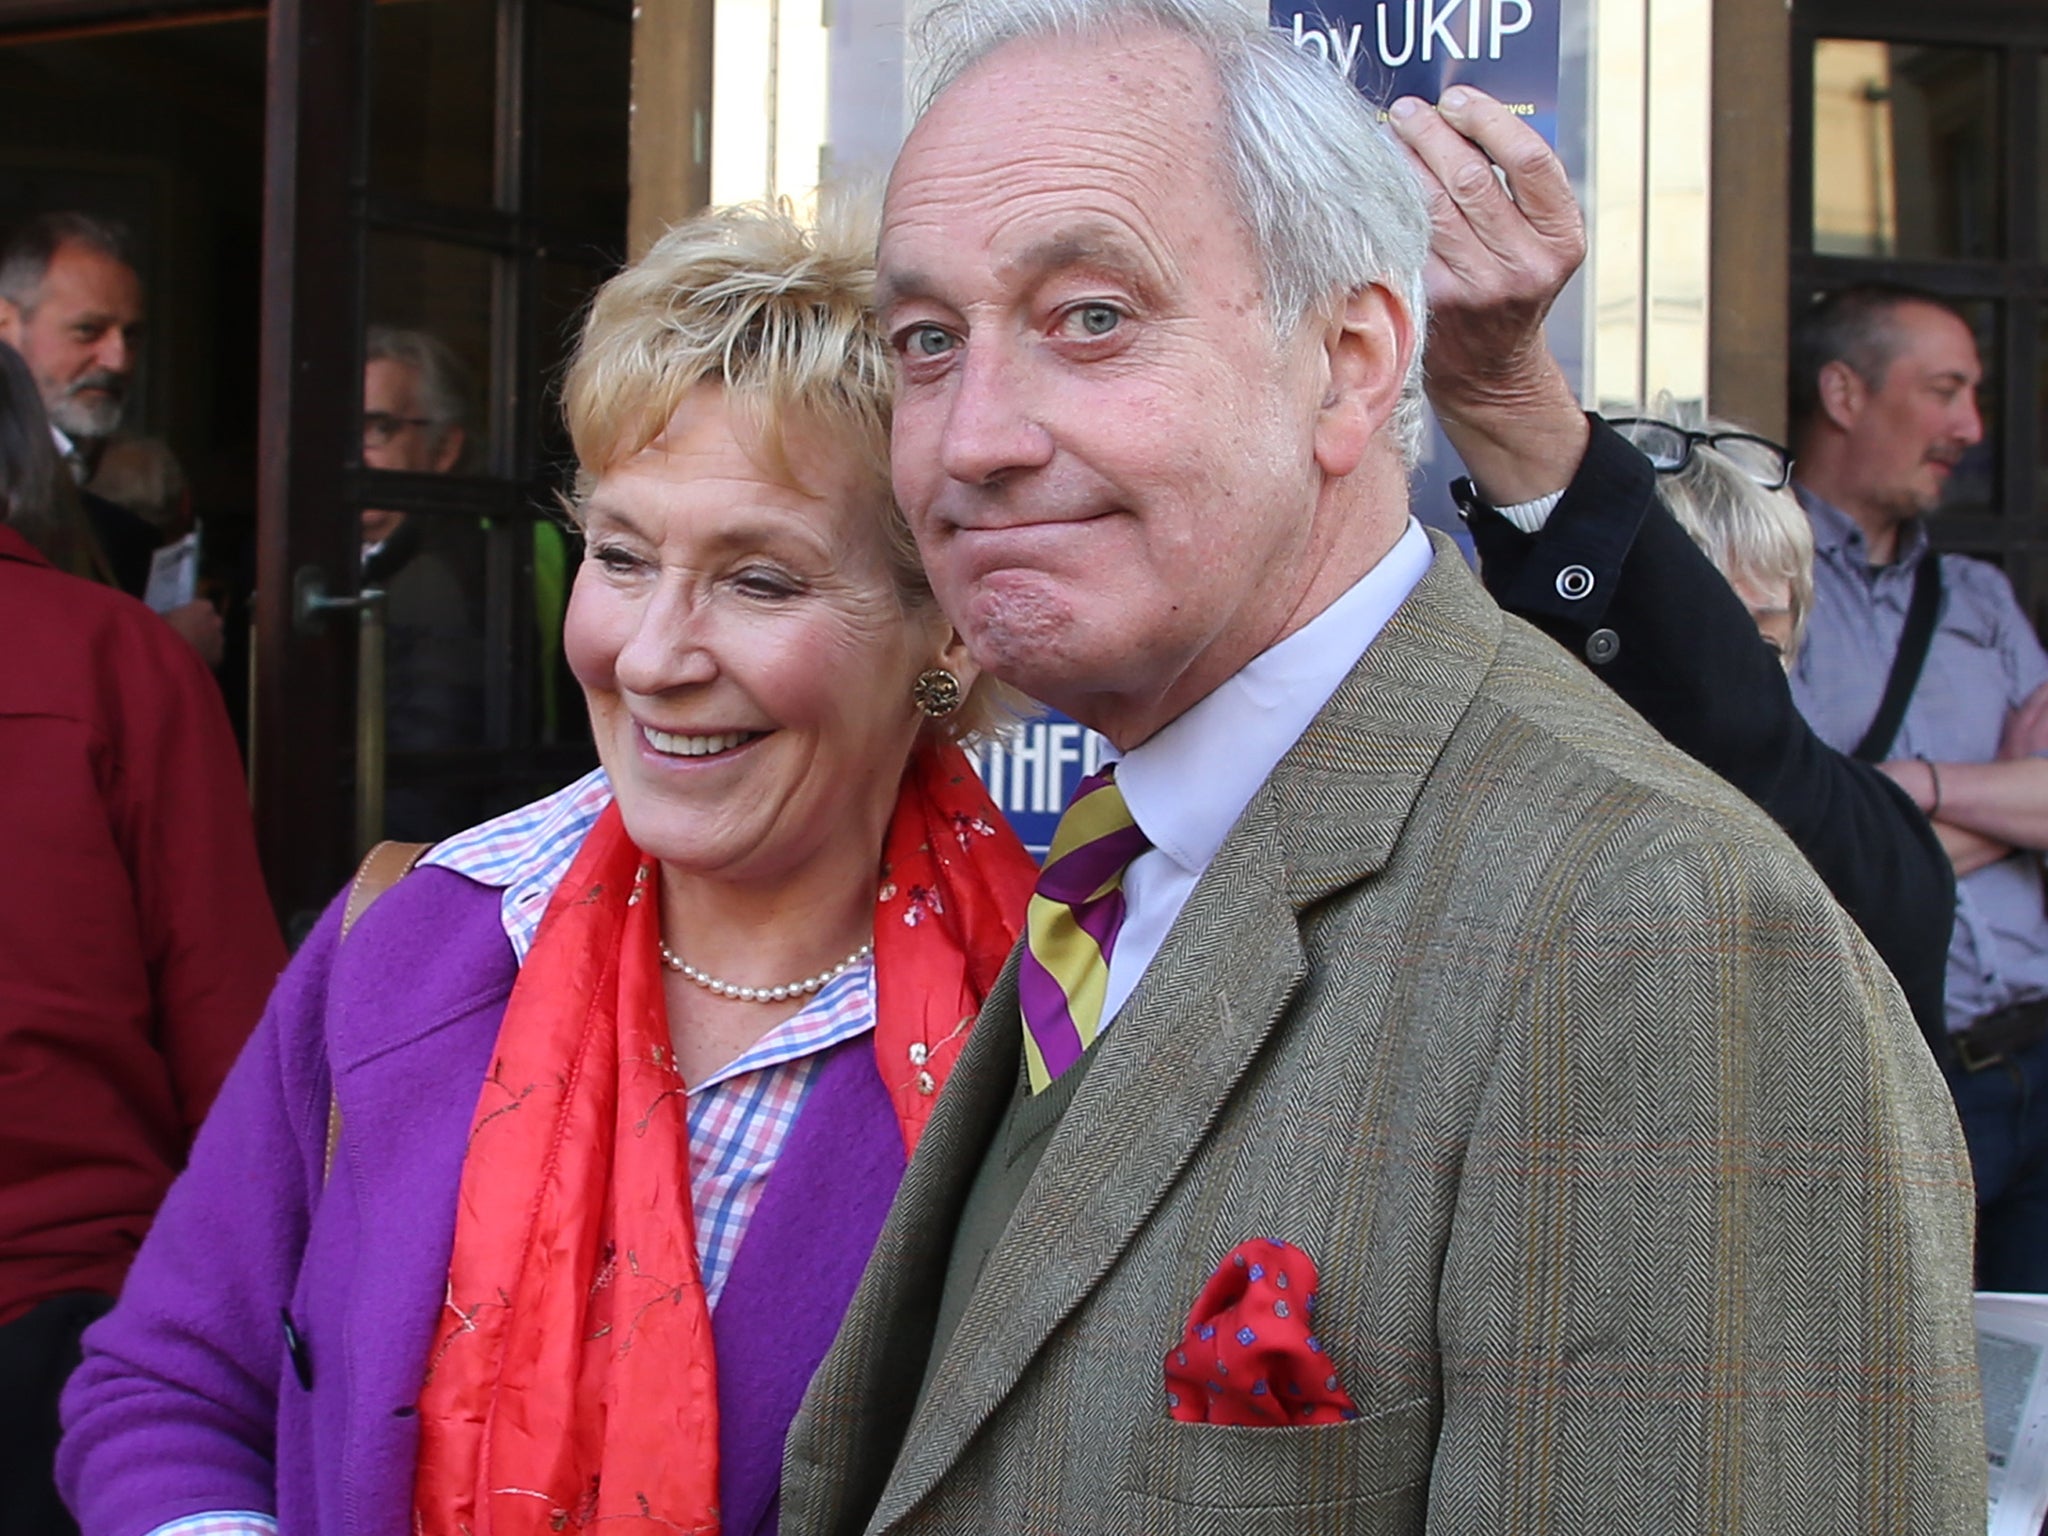 Neil and Christine Hamilton have enjoyed celebrity status since the 'cash for questions' scandal